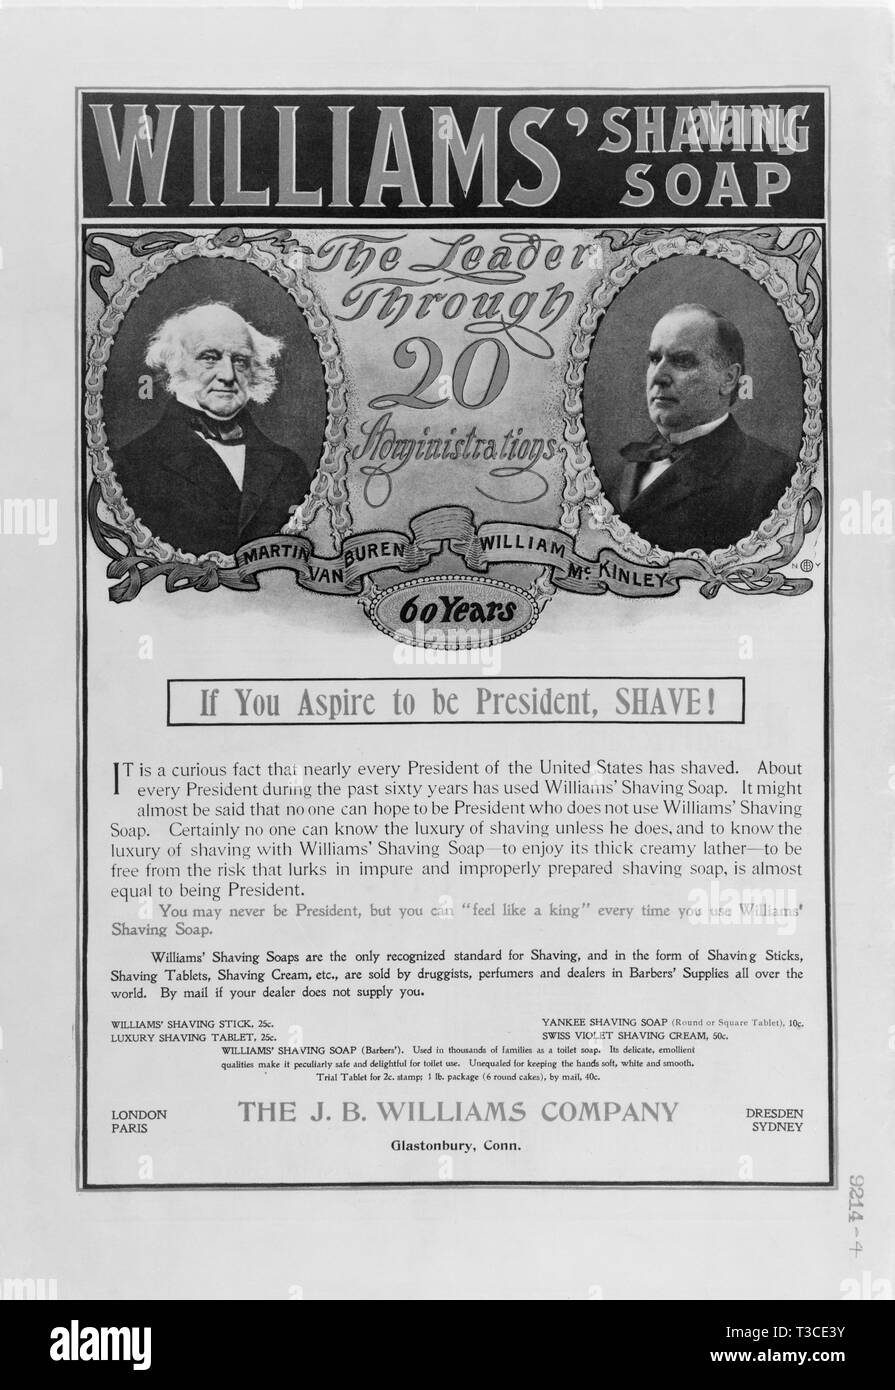 Advertisement for Williams' Shaving Soap showing head and shoulder portraits of U.S. Presidents Martin Van Buren and William McKinley, P.F. Collier & Son, March 16, 1901 Stock Photo